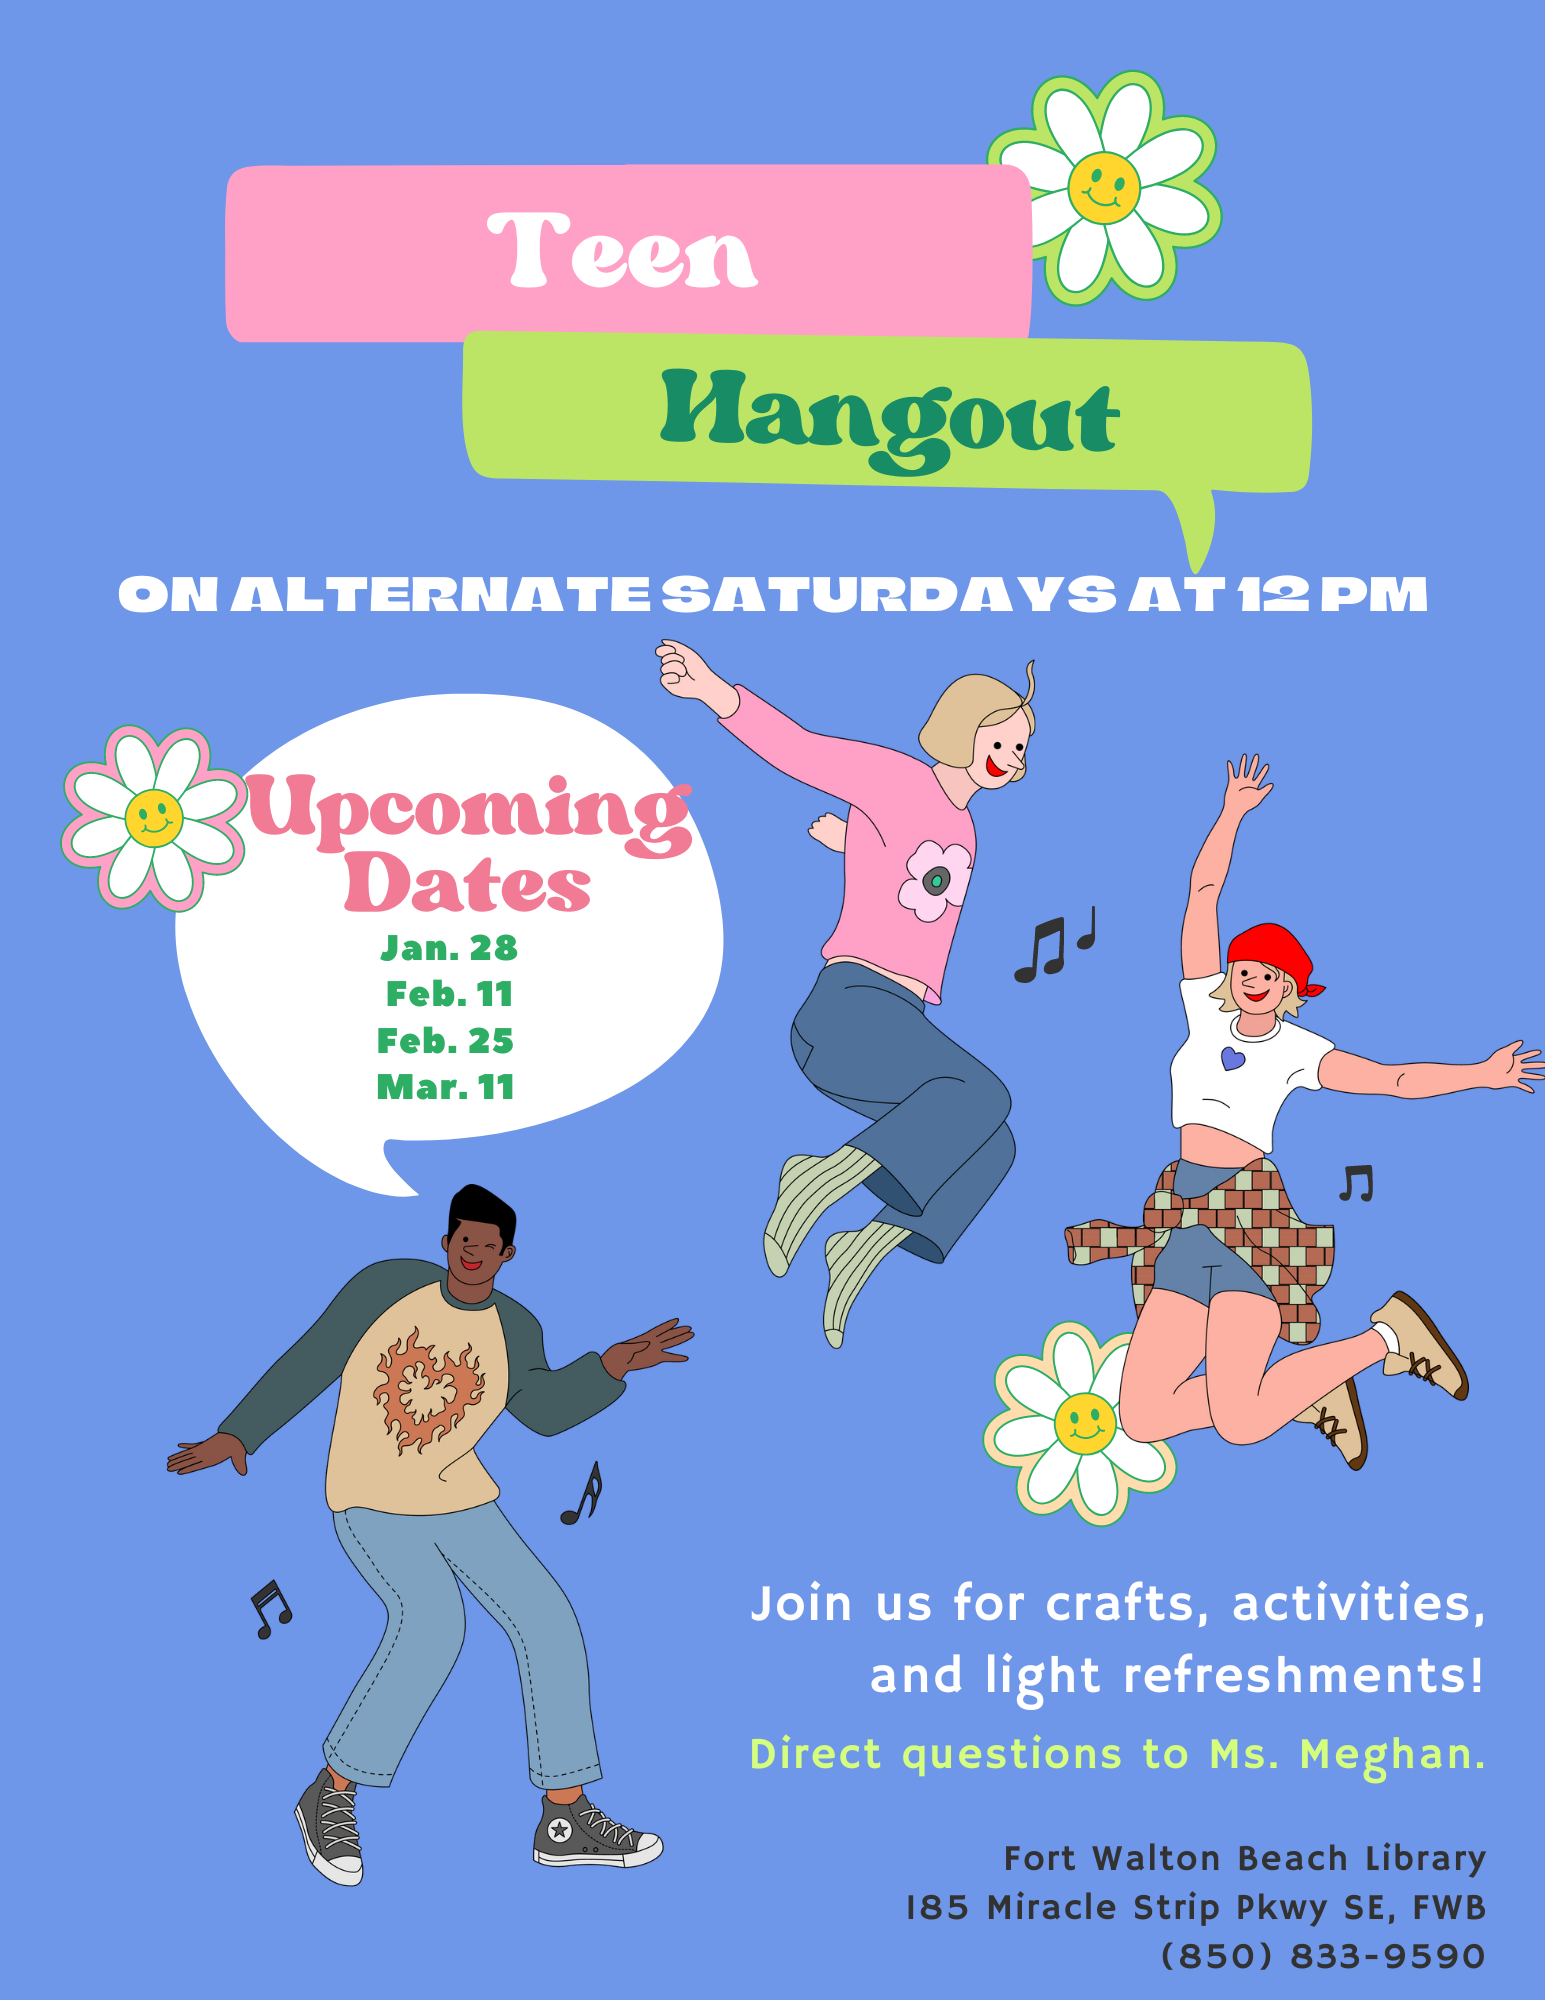 Image is a flyer titled "Teen Hangout" with upcoming dates. There is a blue background with three teens jumping. 